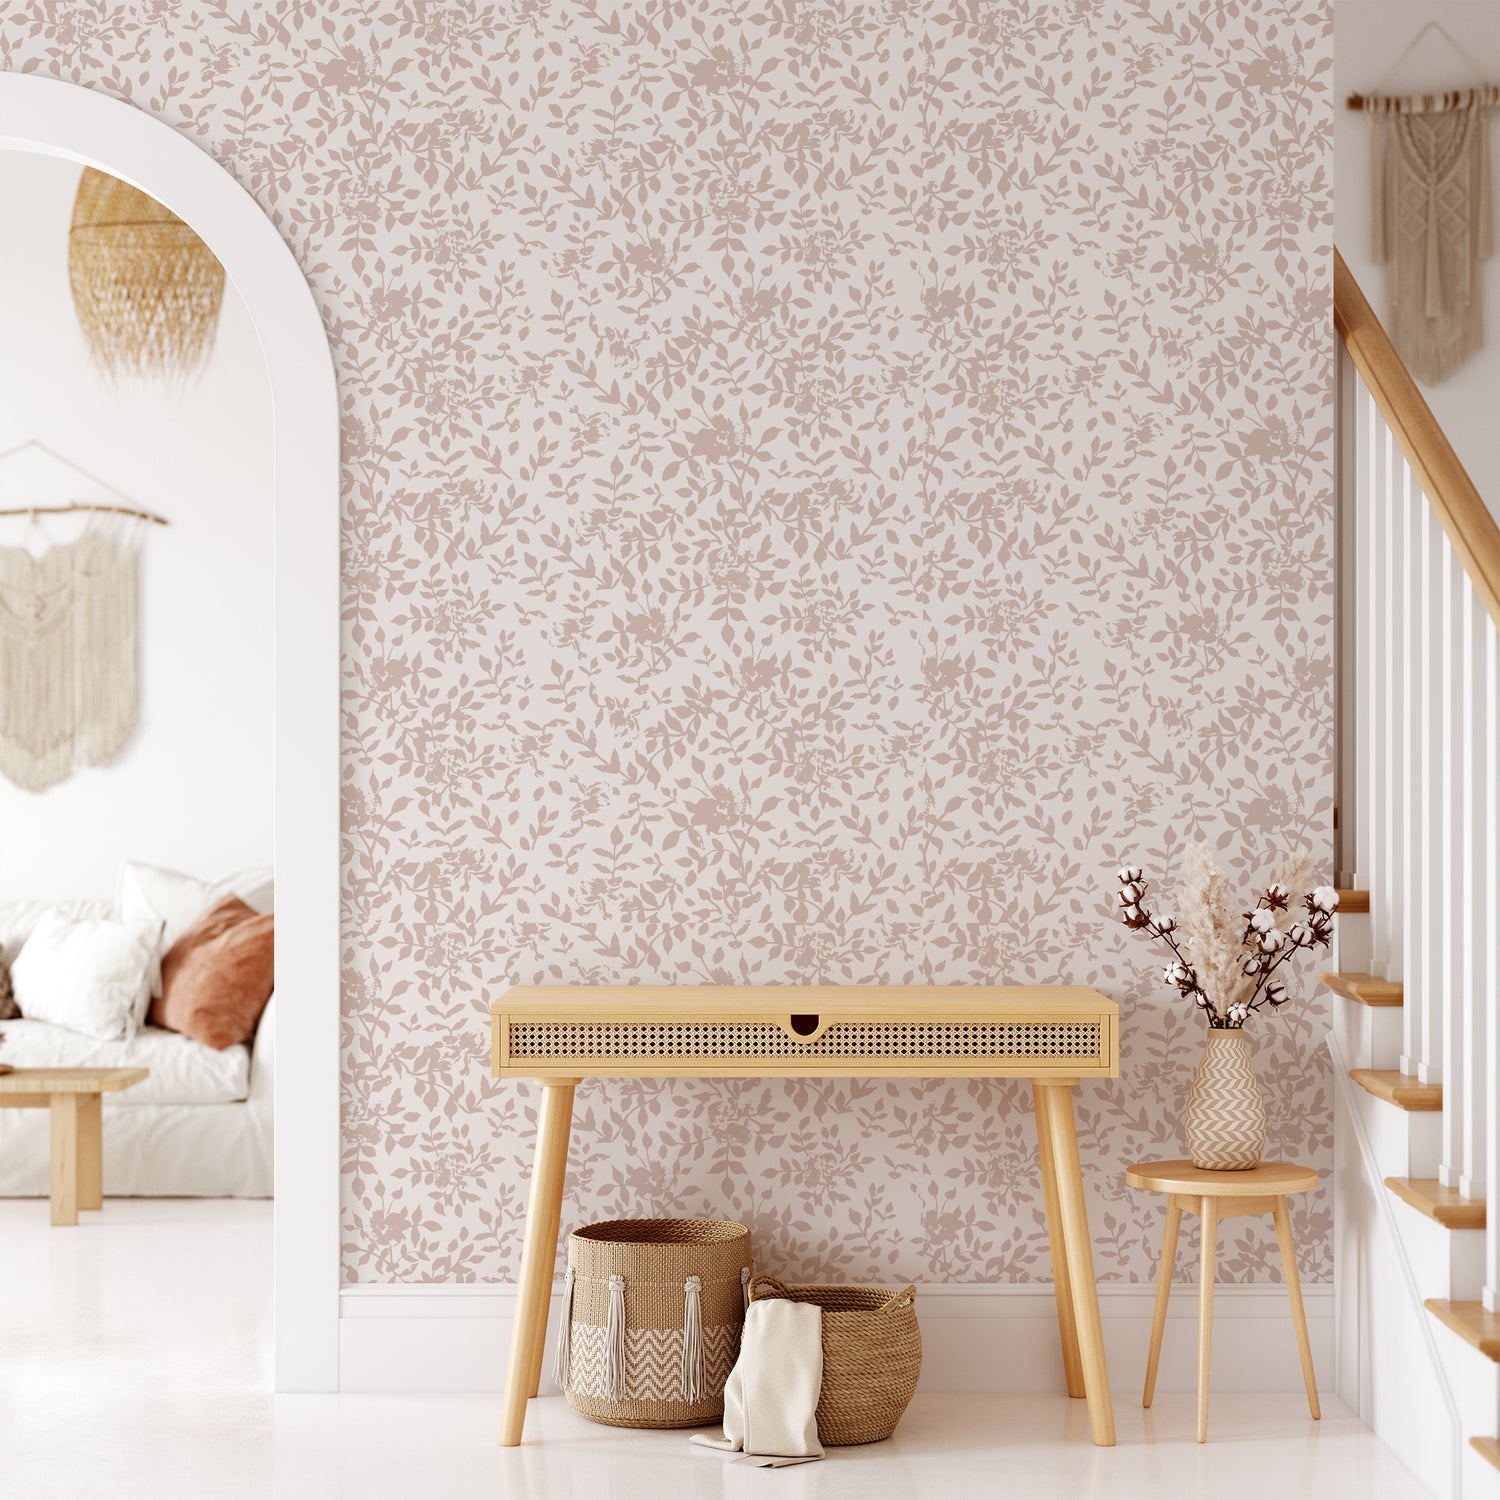 Living room wall featuring our floral Florence peel and stick wallpaper in pink, taupe nude on a white background. This organic floral has a painted feel and makes the perfect accent wall!